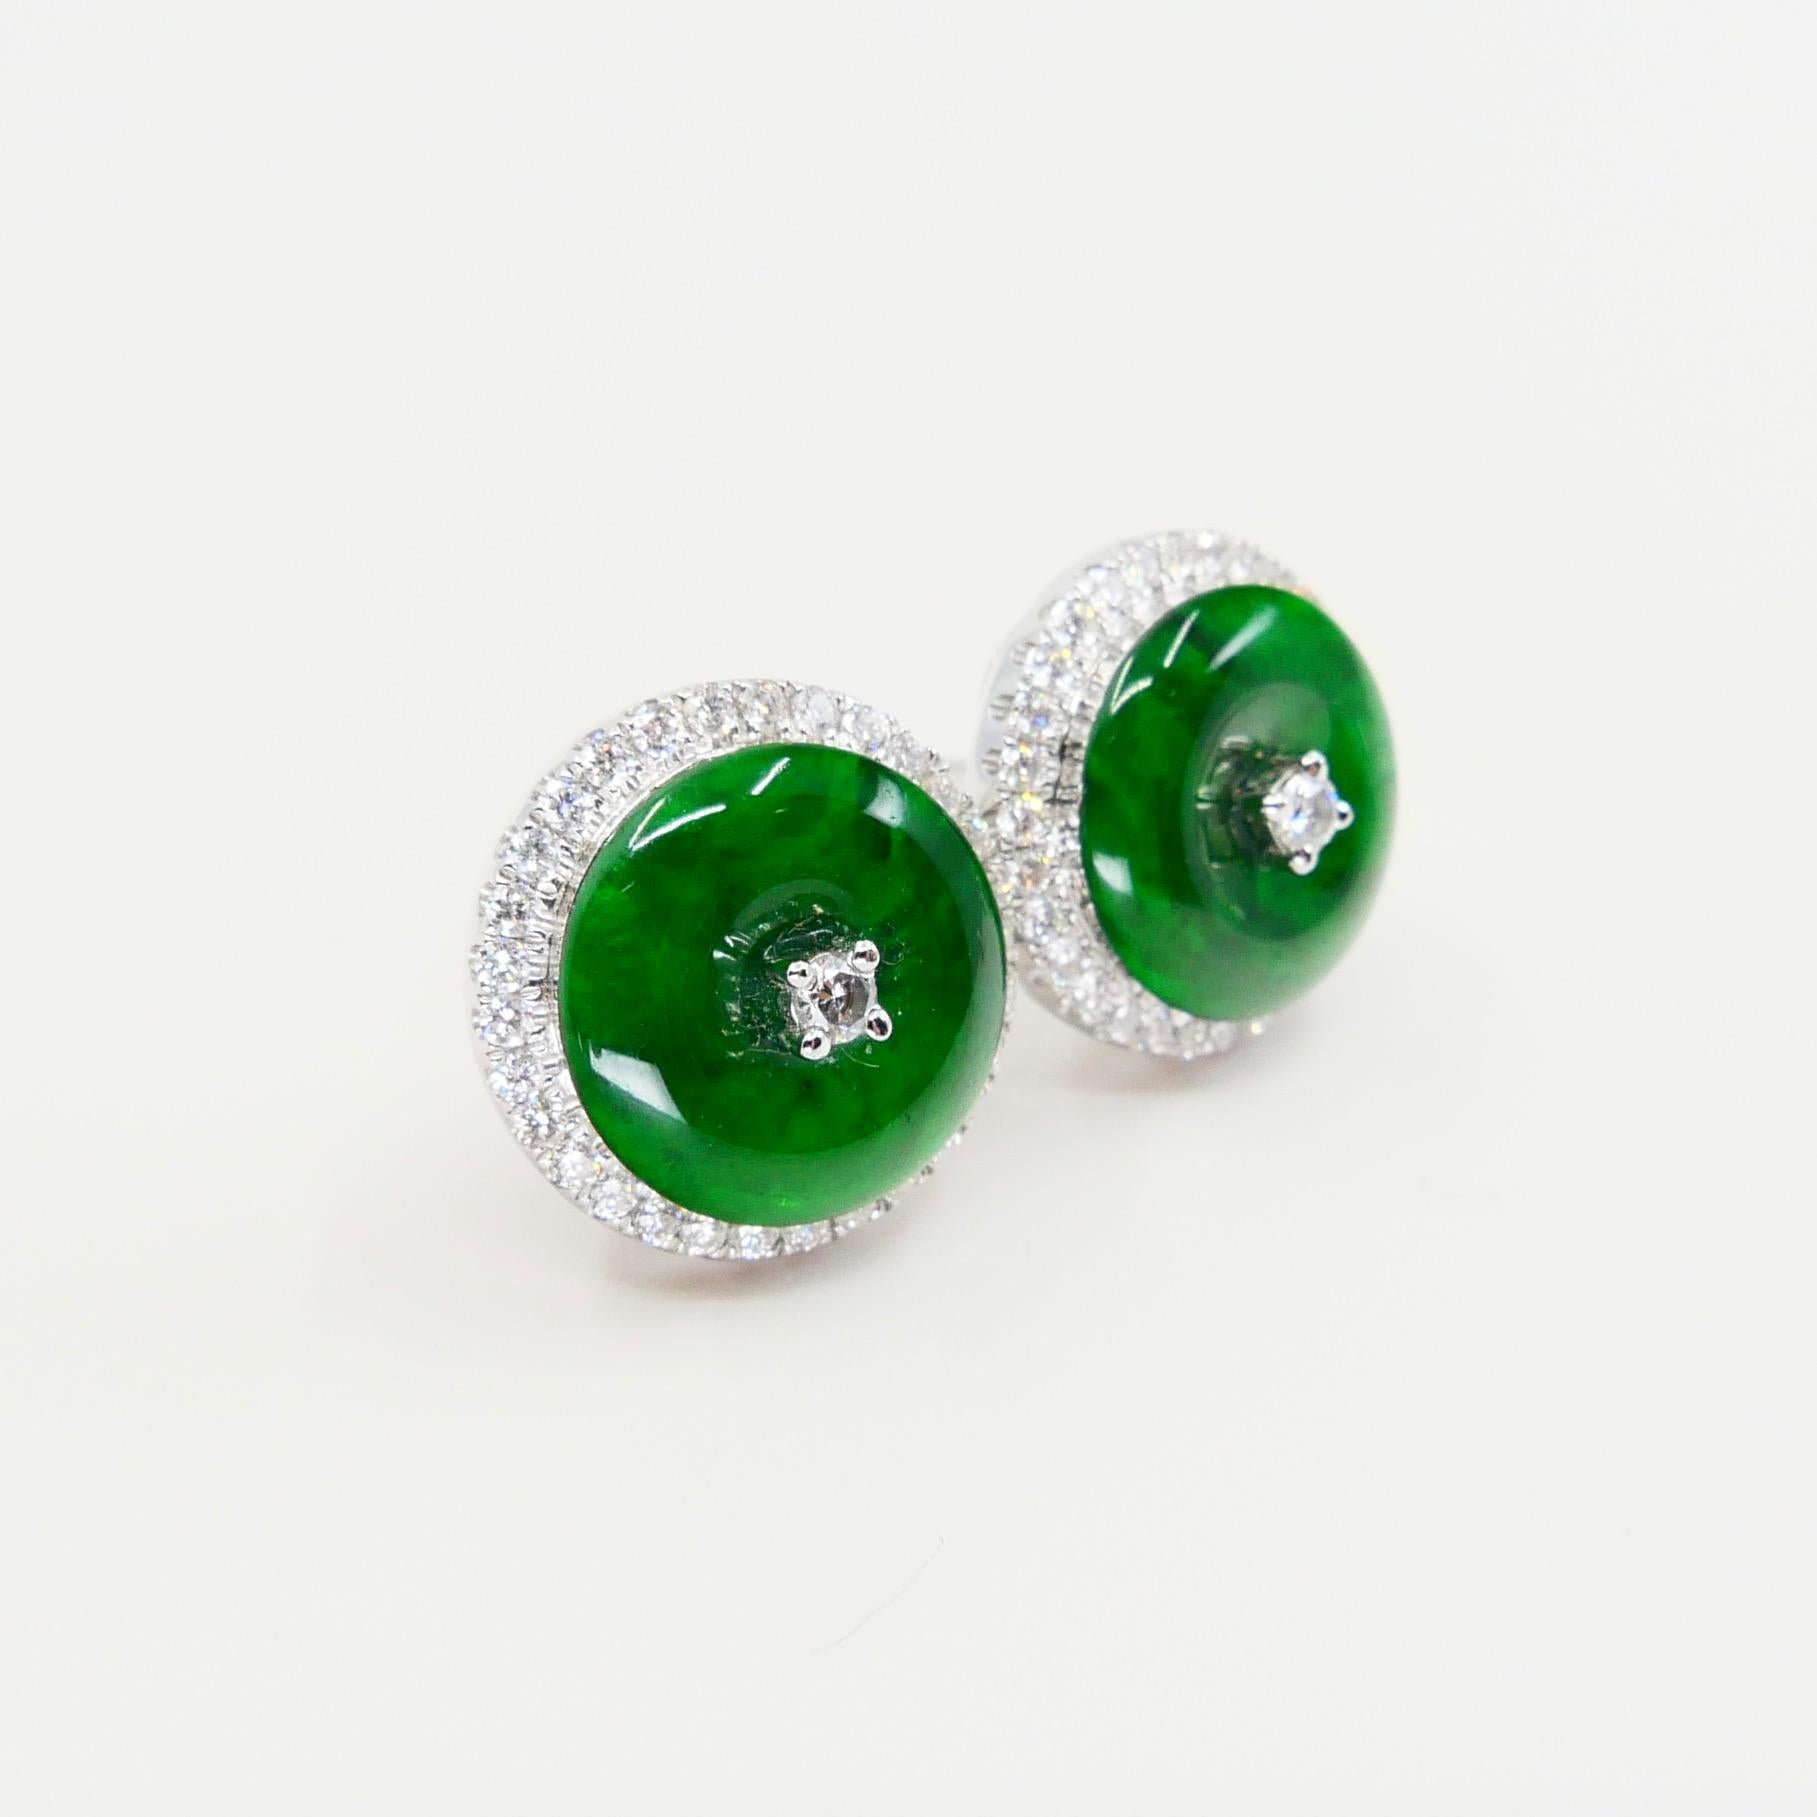 Certified Natural Type A Jadeite Jade and Diamond Earrings, Spinach Green Color 3